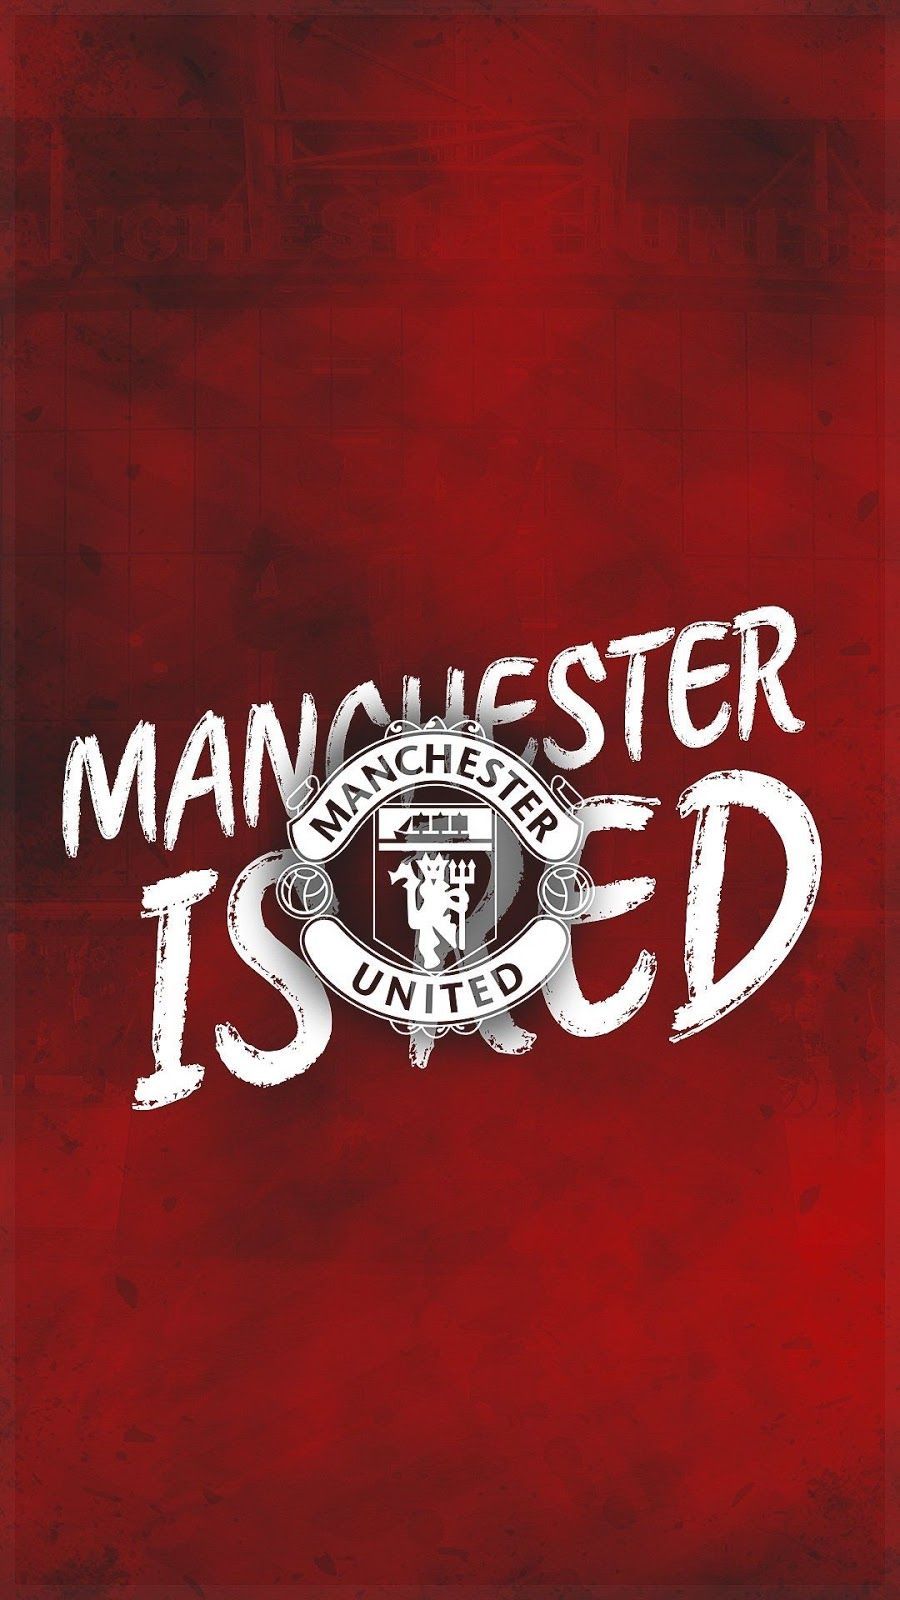 manchester united iphone wallpaper HD. Manchester united wallpaper, Manchester united logo, Manchester united wallpaper iphone